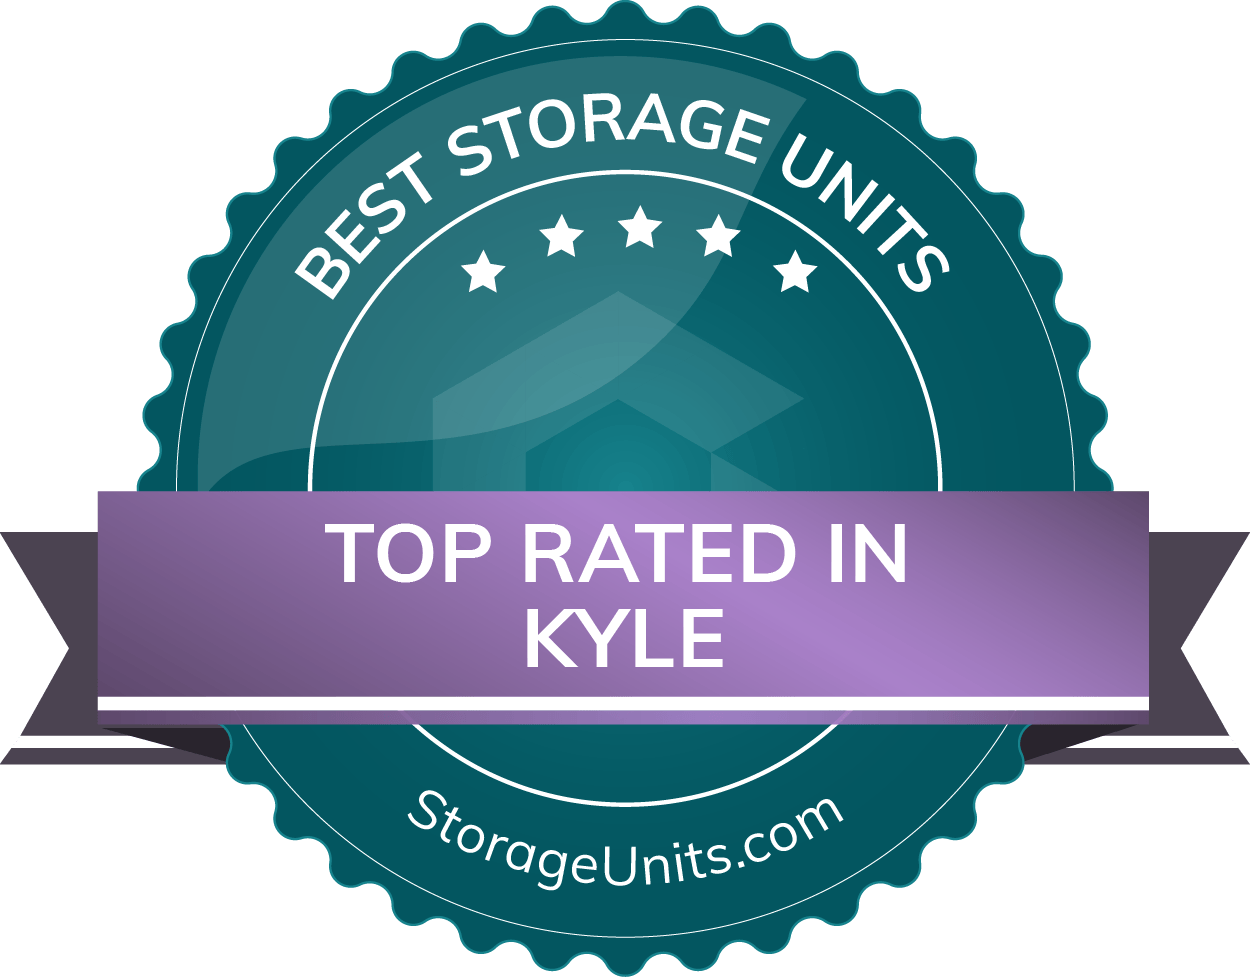 Top Rated in Kyle